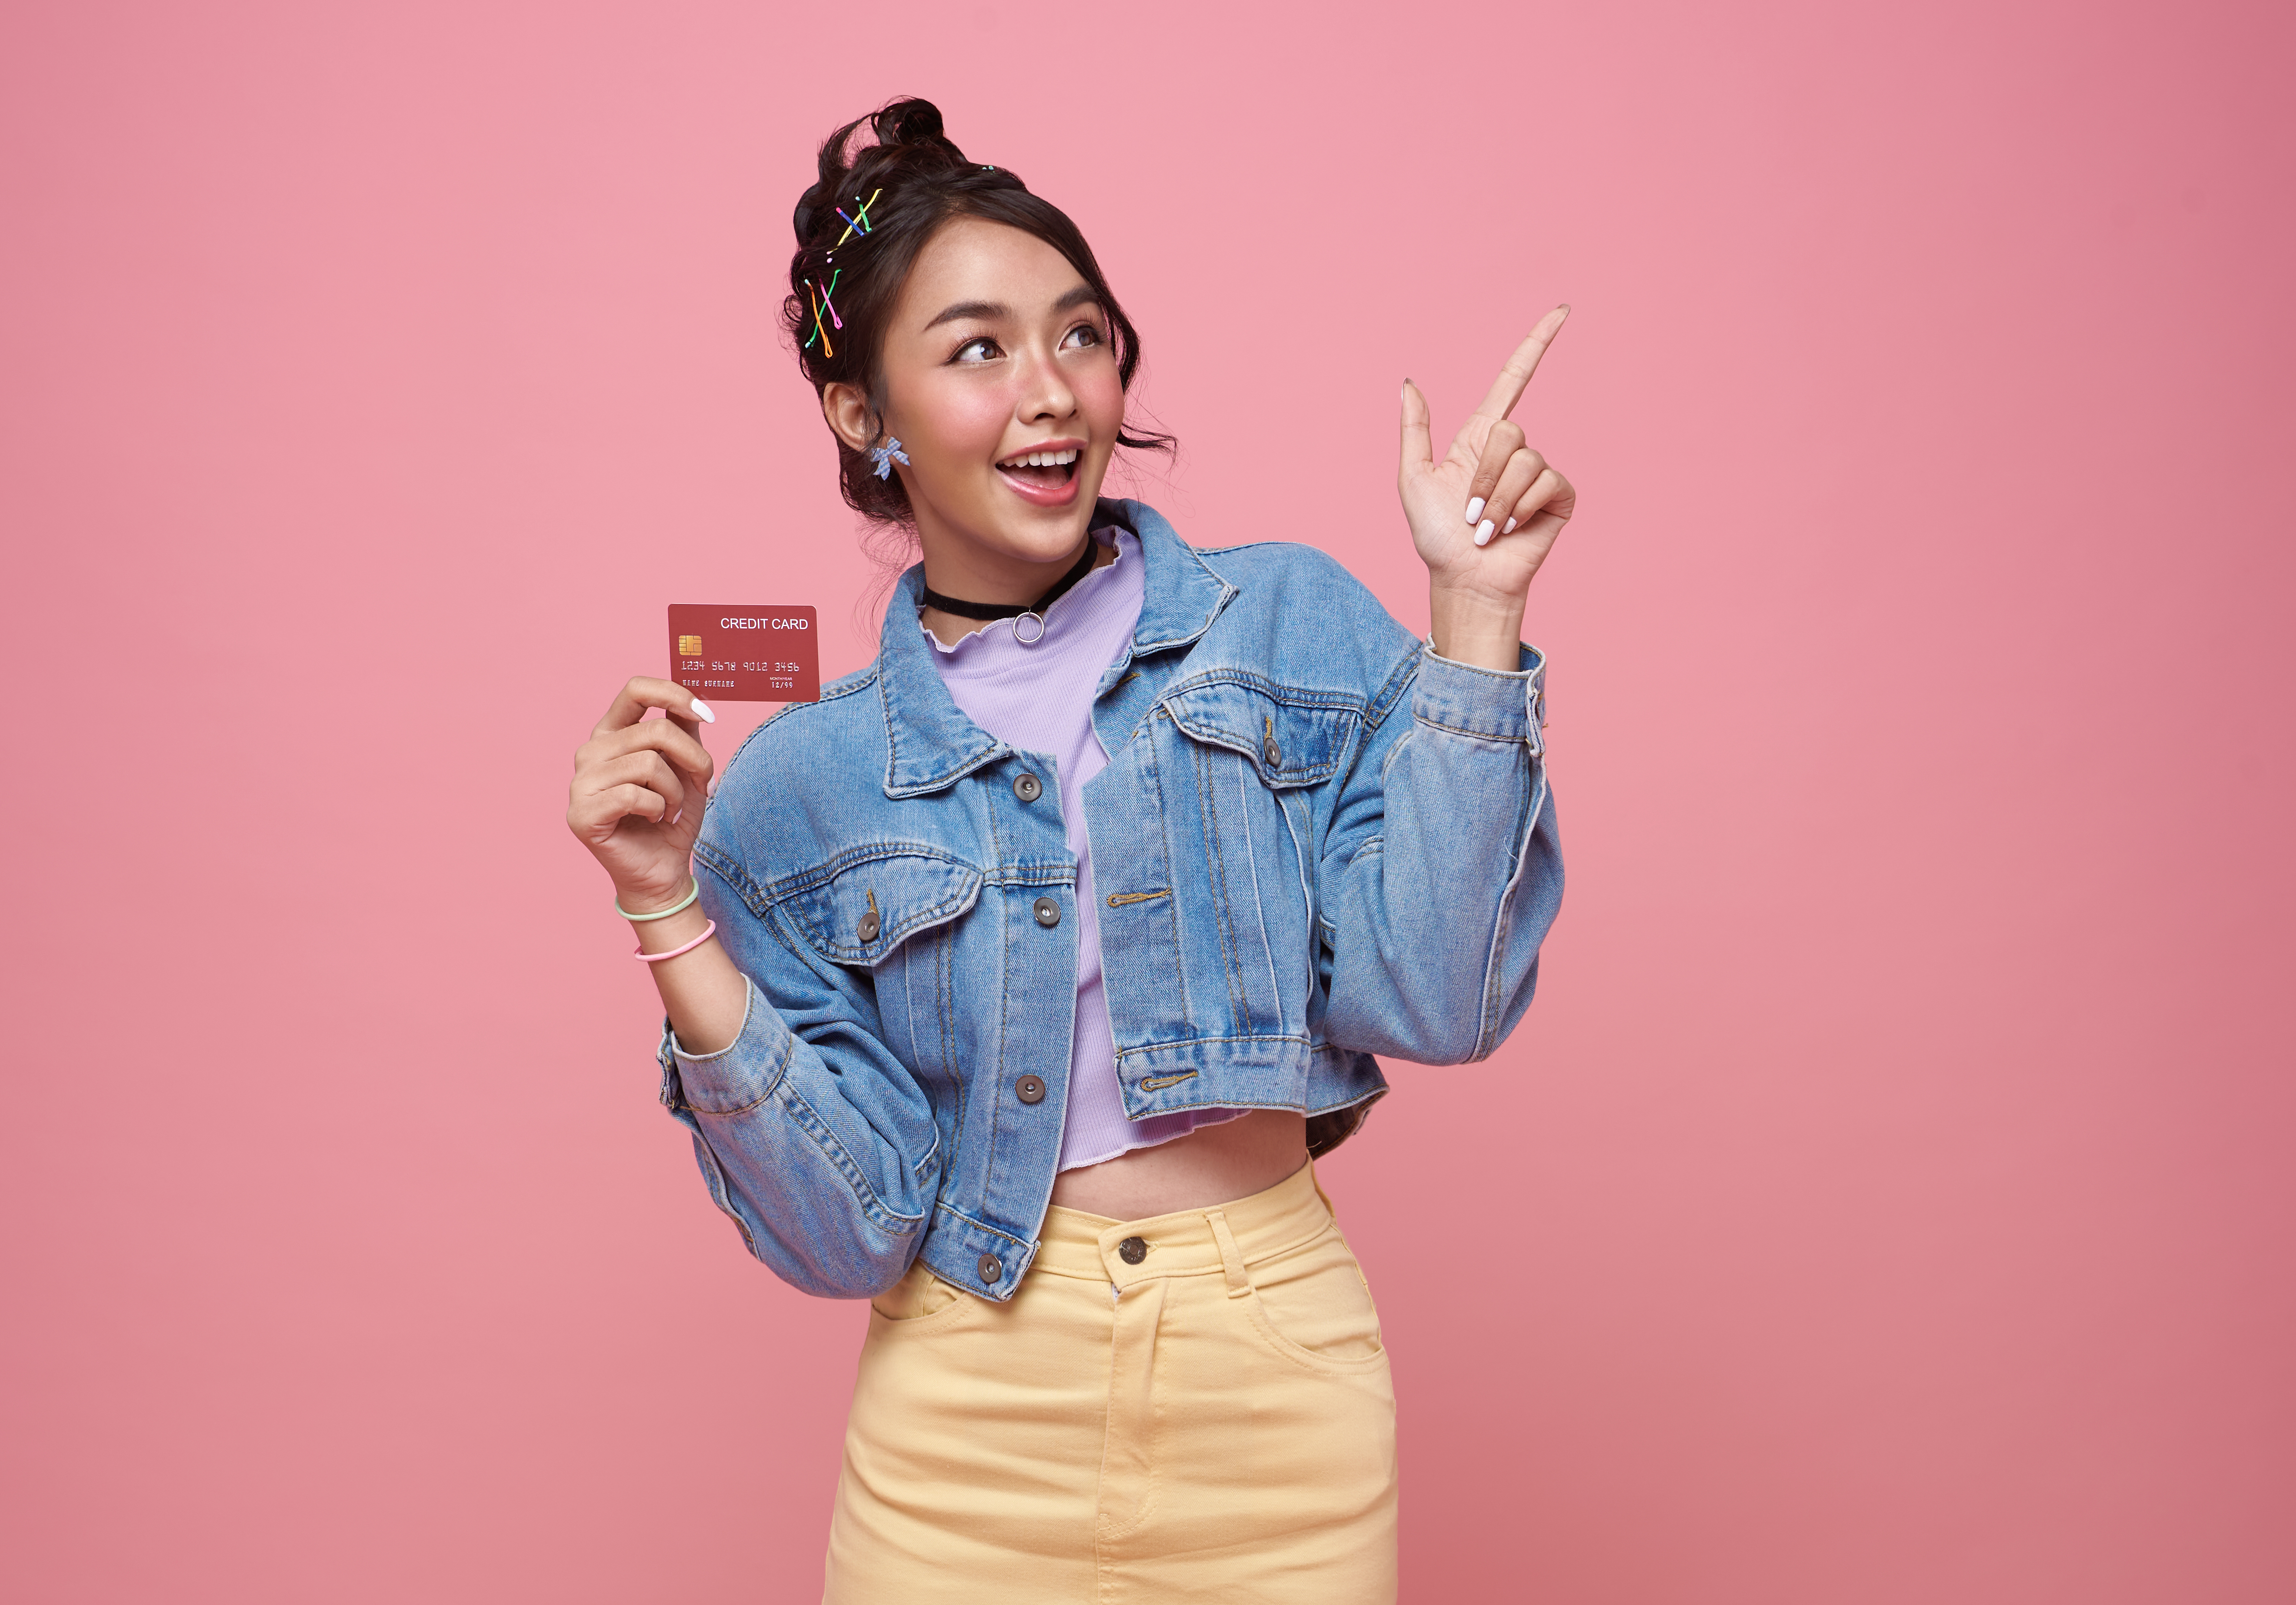 https://img.moneyduck.com/article_attachment/1689826709-happy-beautiful-asian-teen-shopaholic-women-showing-credit-card-her-finger-pointing-pink.jpg